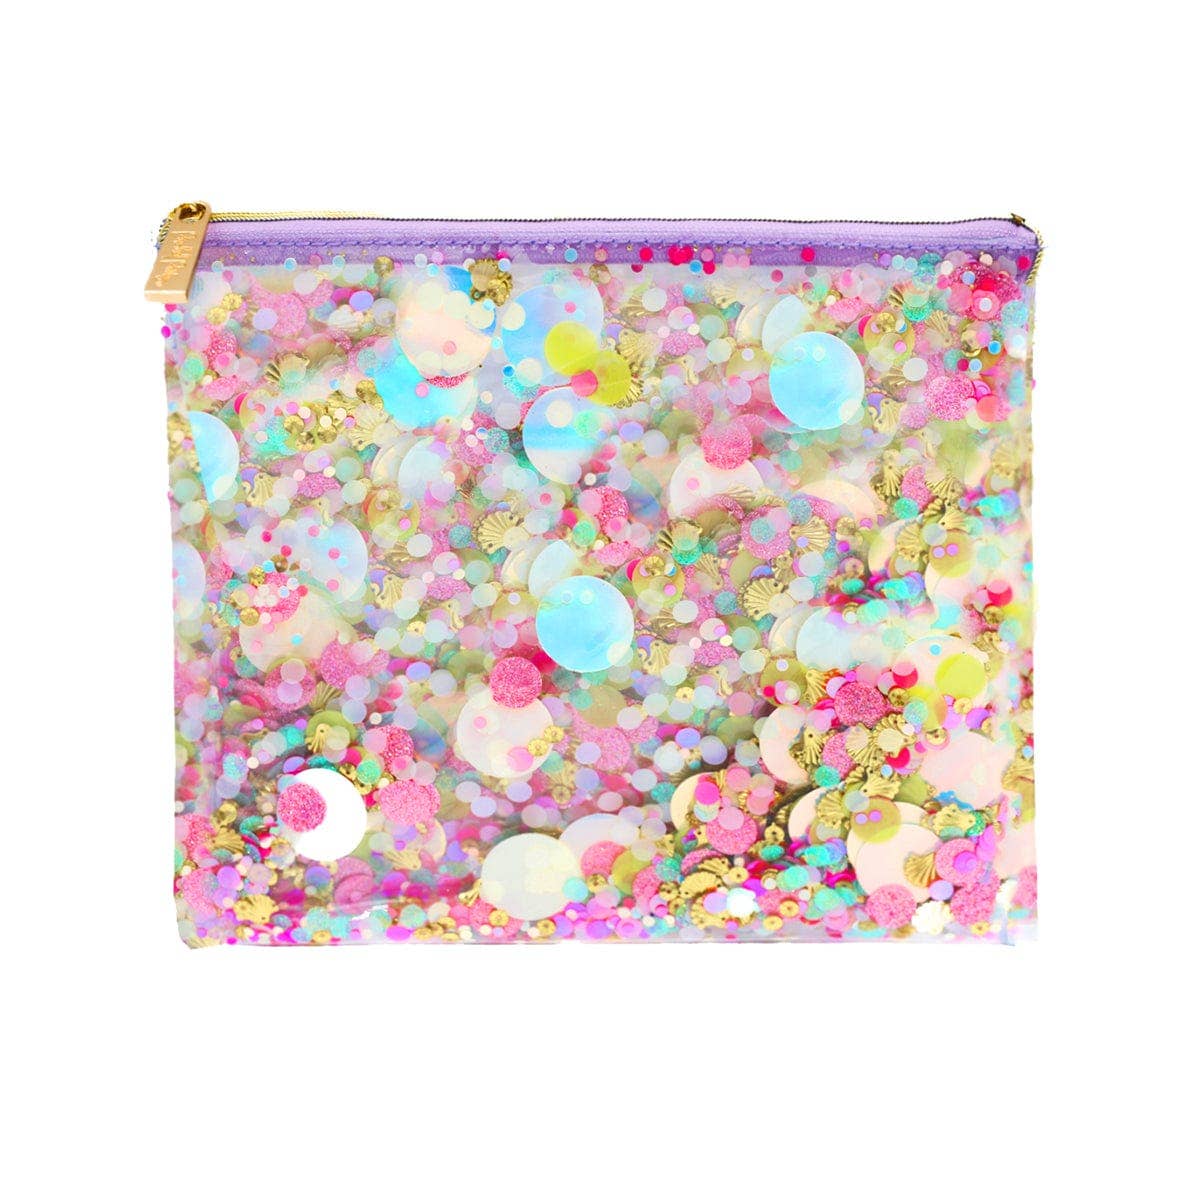 Shell-ebrate Confetti Everything Pouch